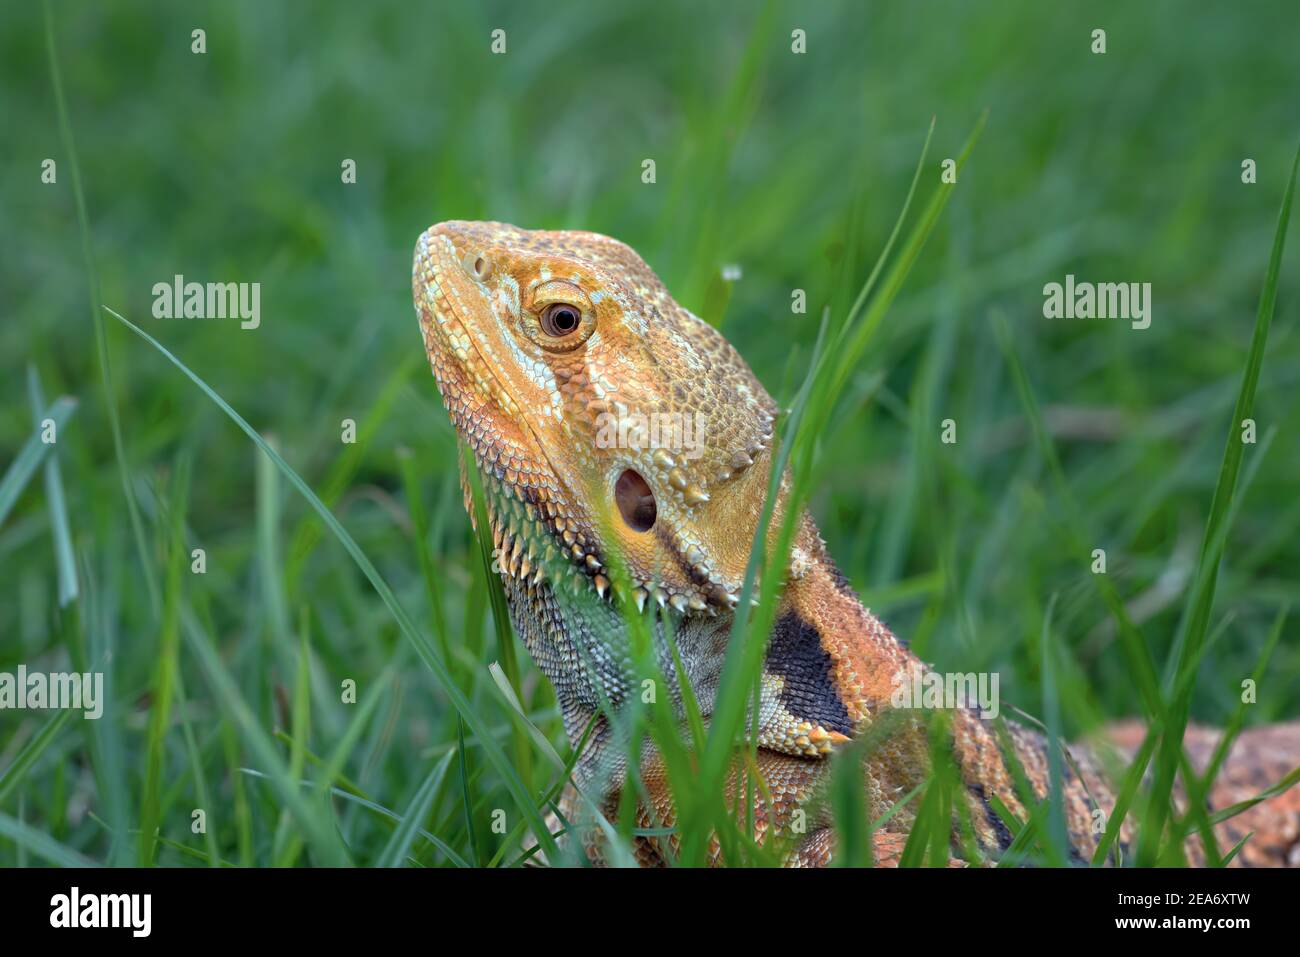 Portrait of a Bearded dragon in the grass, Indonesia Stock Photo